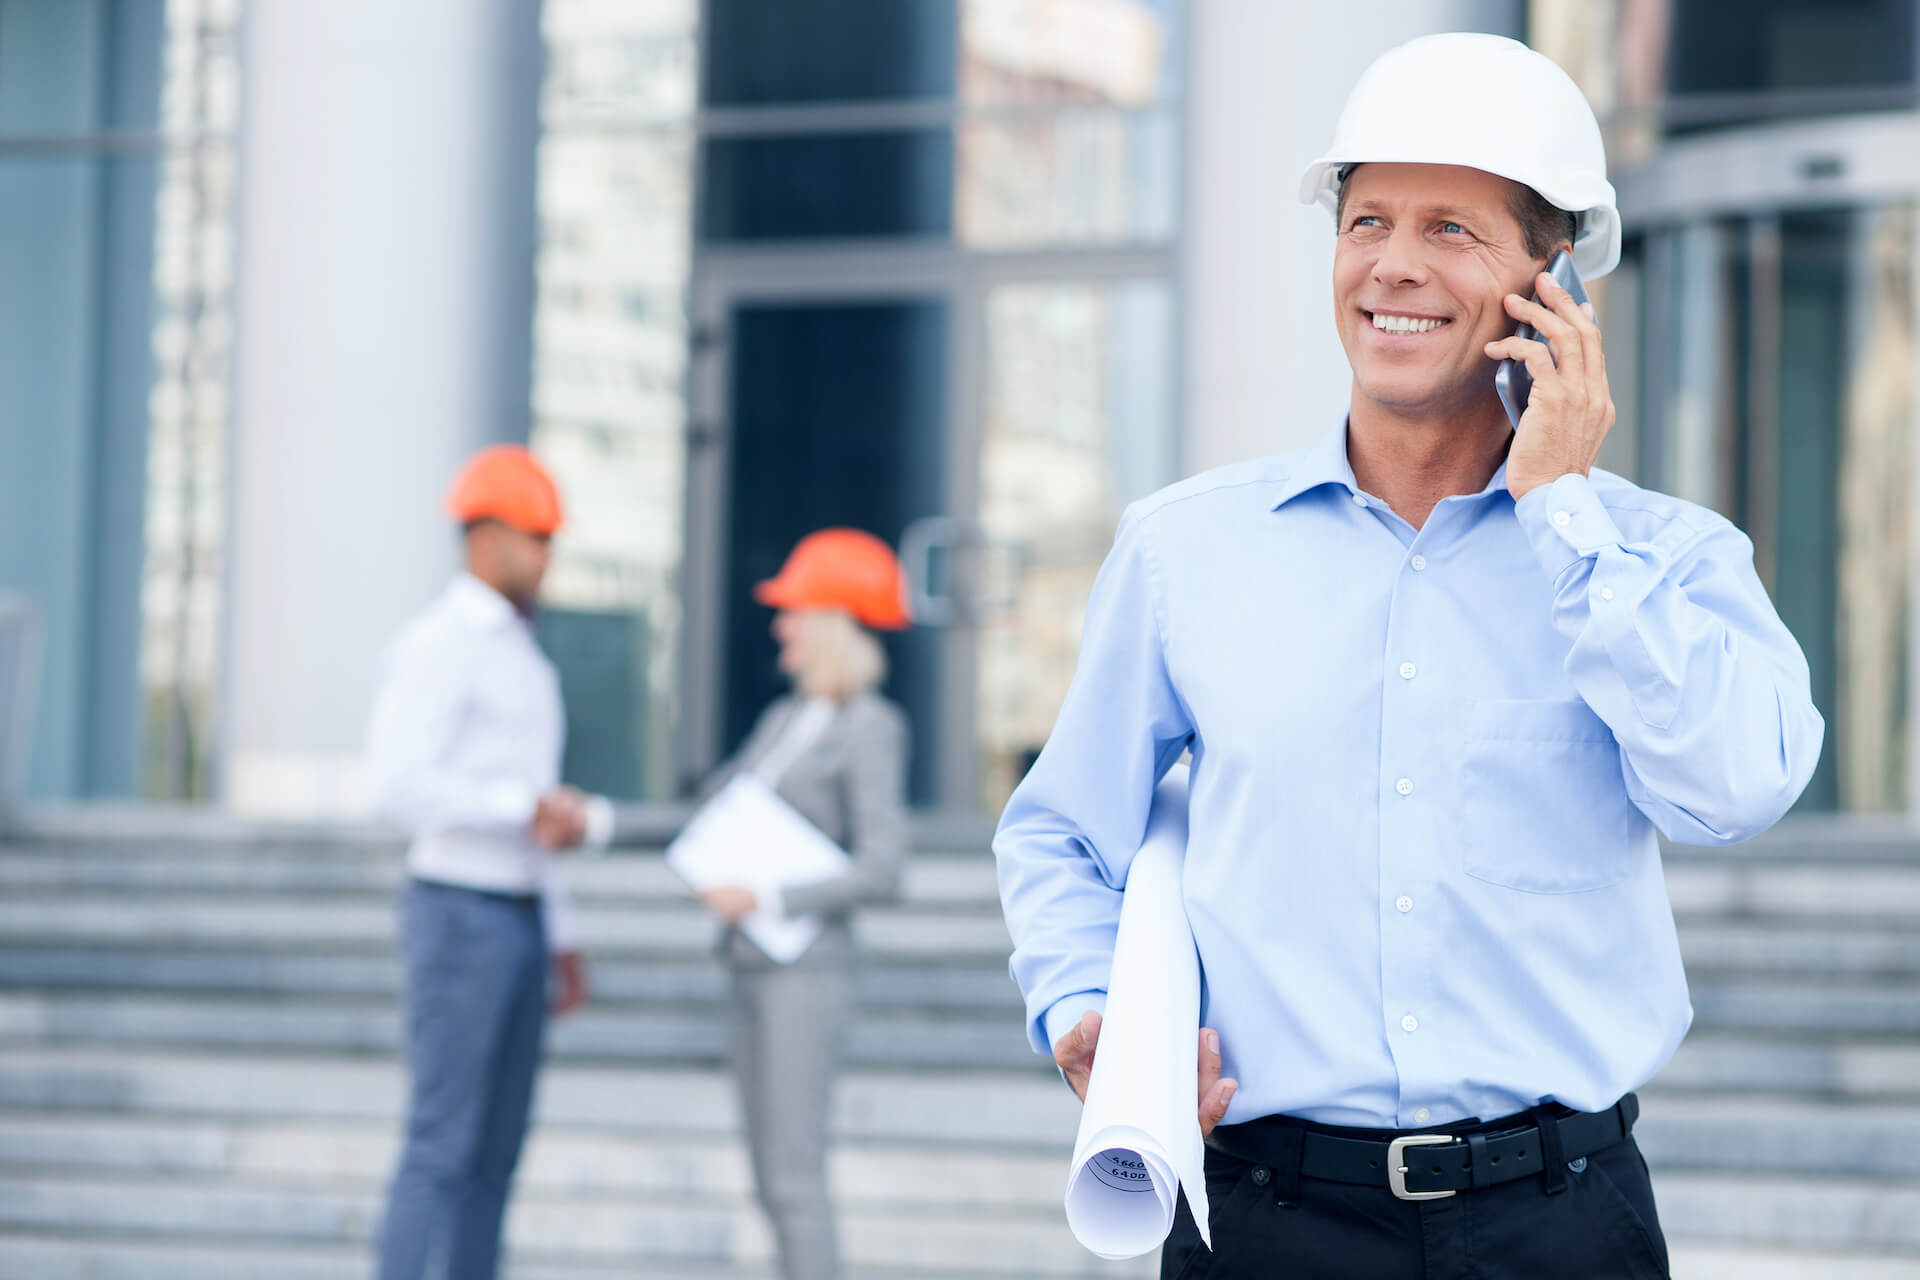 How To Get Clients For Construction Business